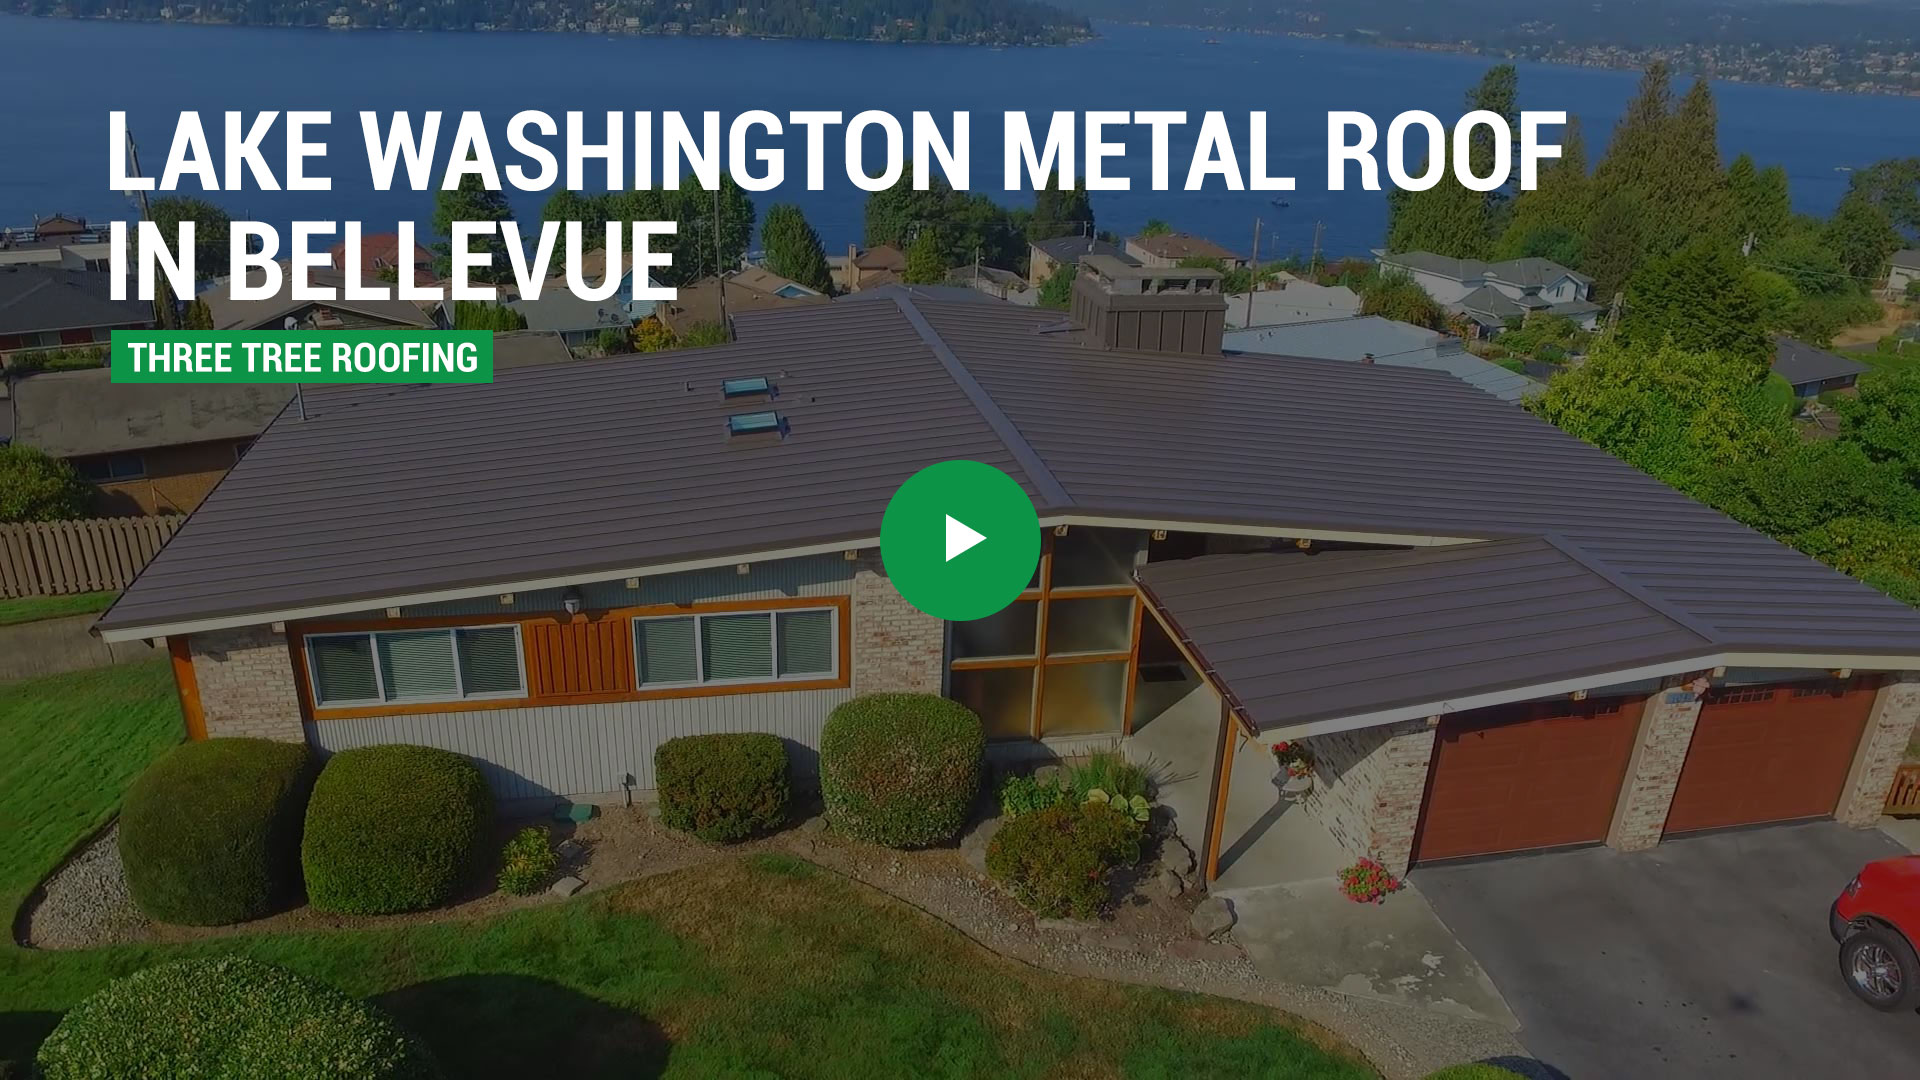 Roofing Project: Lake Washington Metal Roof in Bellevue - Roofing Video